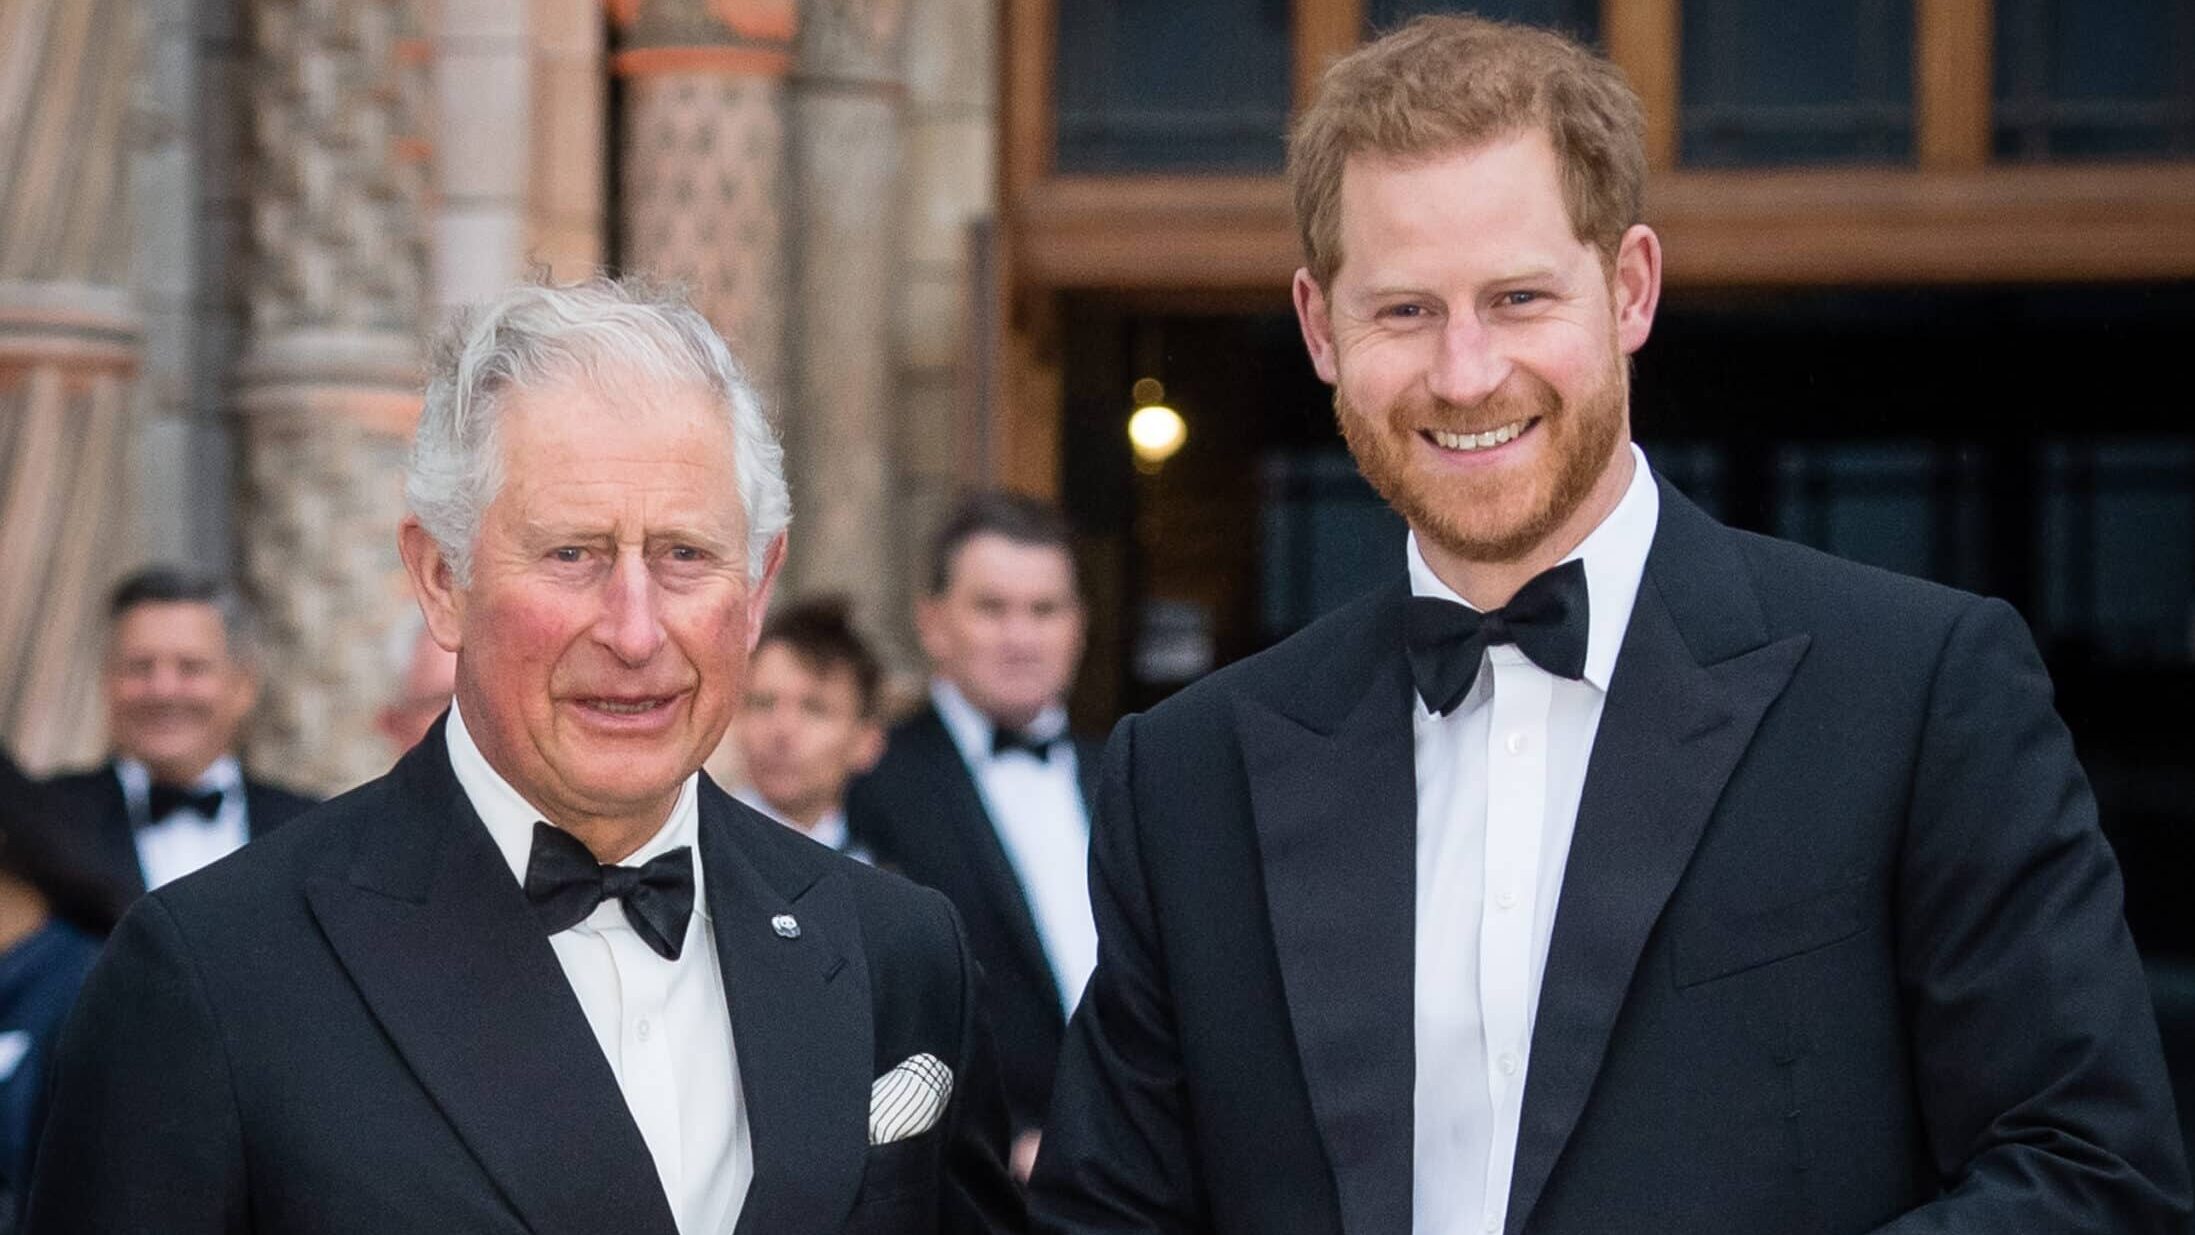 Prince Charles, Prince of Wales and Prince Harry, Duke of Sussex attend the "Our Planet" global premiere at Natural History Museum on April 04, 2019 in London, England.